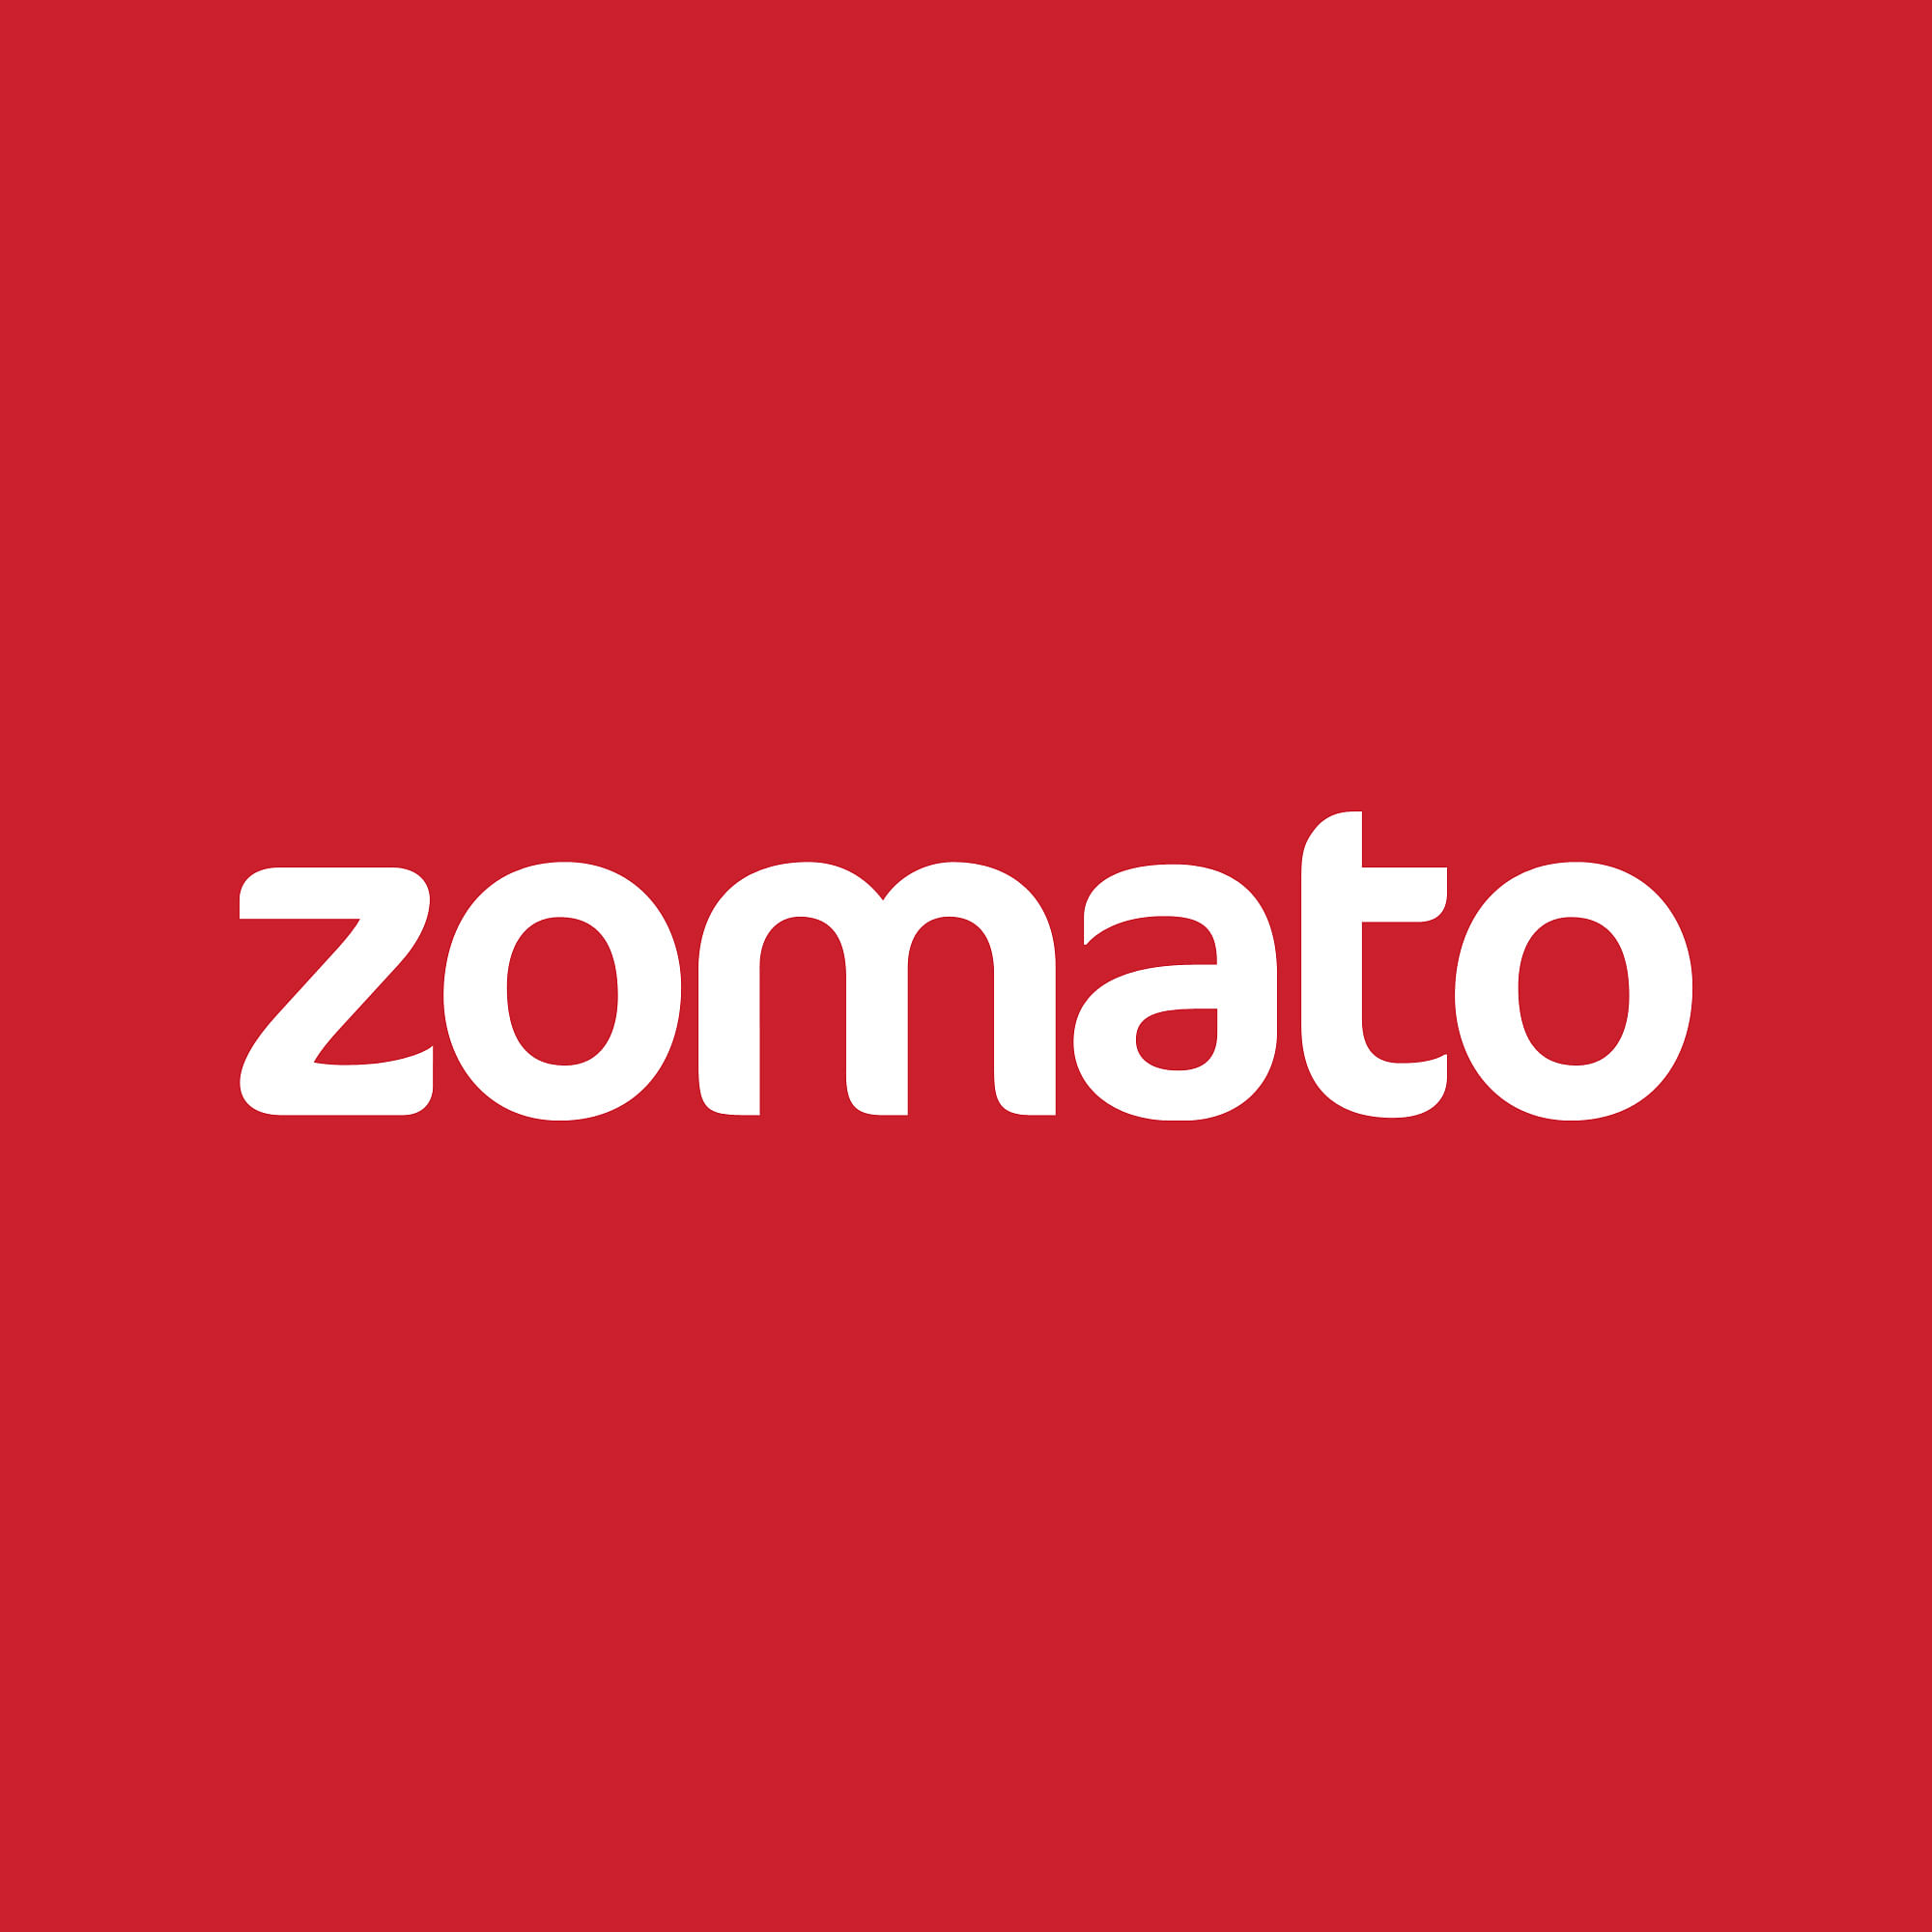 Zomato currently has two warehouses, one each in Bengaluru and Delhi with a combined capacity of 9,000 metric ton (MT) per month. File photo